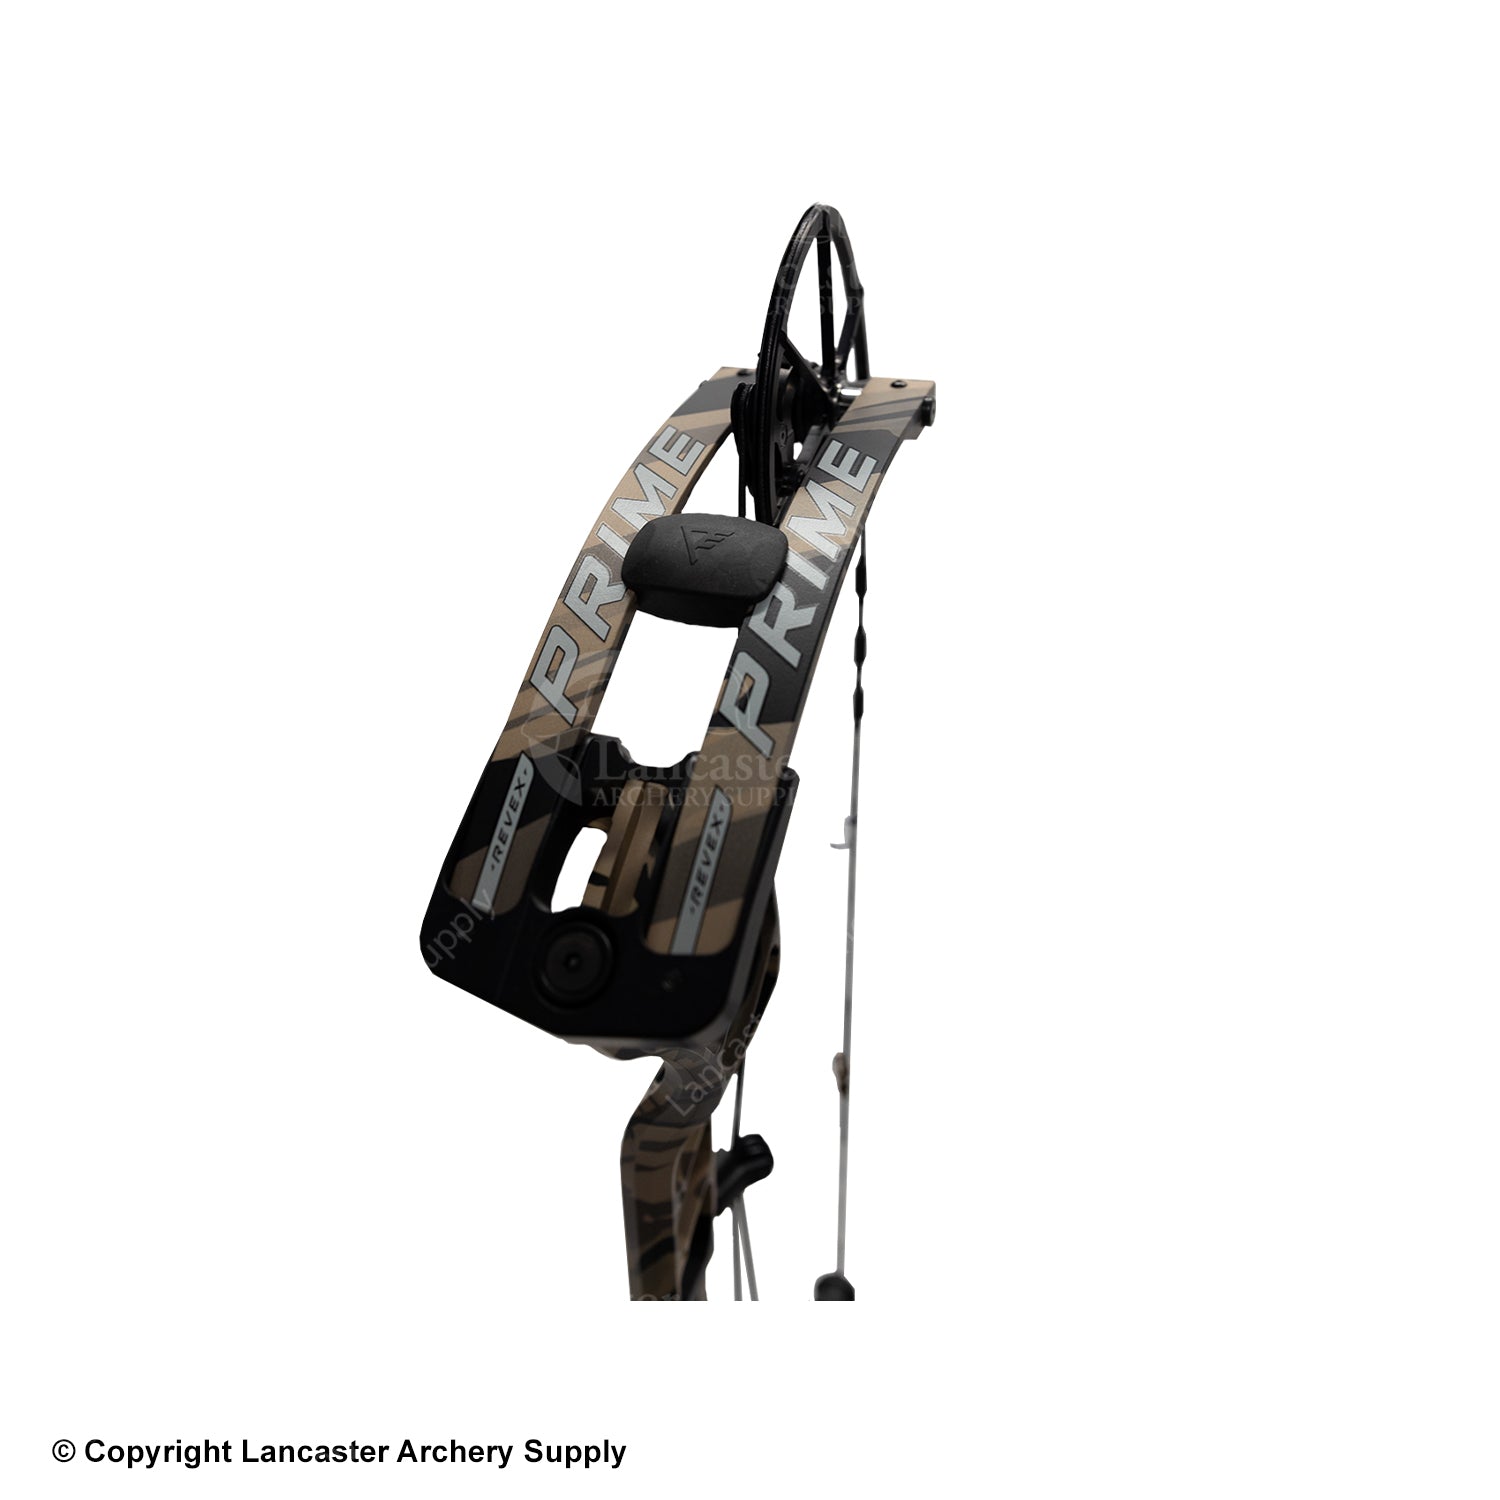 Prime Revex 4 Compound Hunting Bow